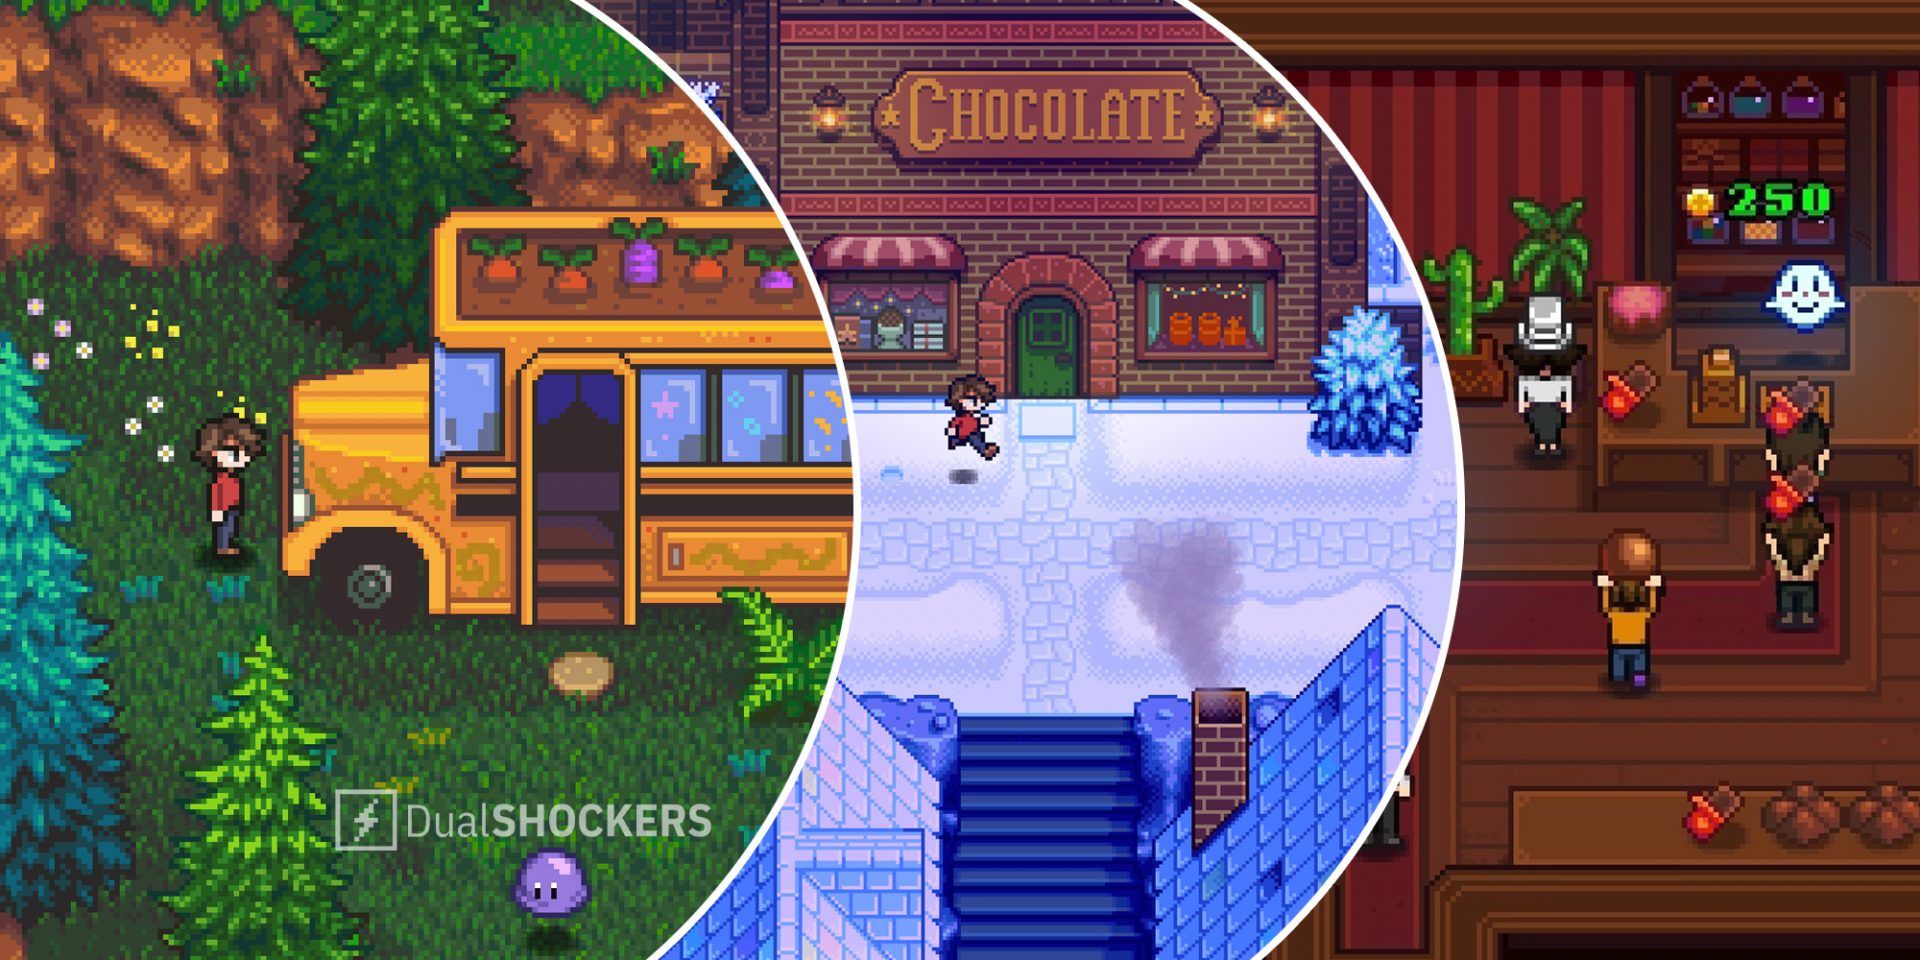 Haunted Chocolatier bus with crops on top on left, Haunted Chocolatier chocolate factory in middle, Haunted Chocolatier characters with chocolate on right